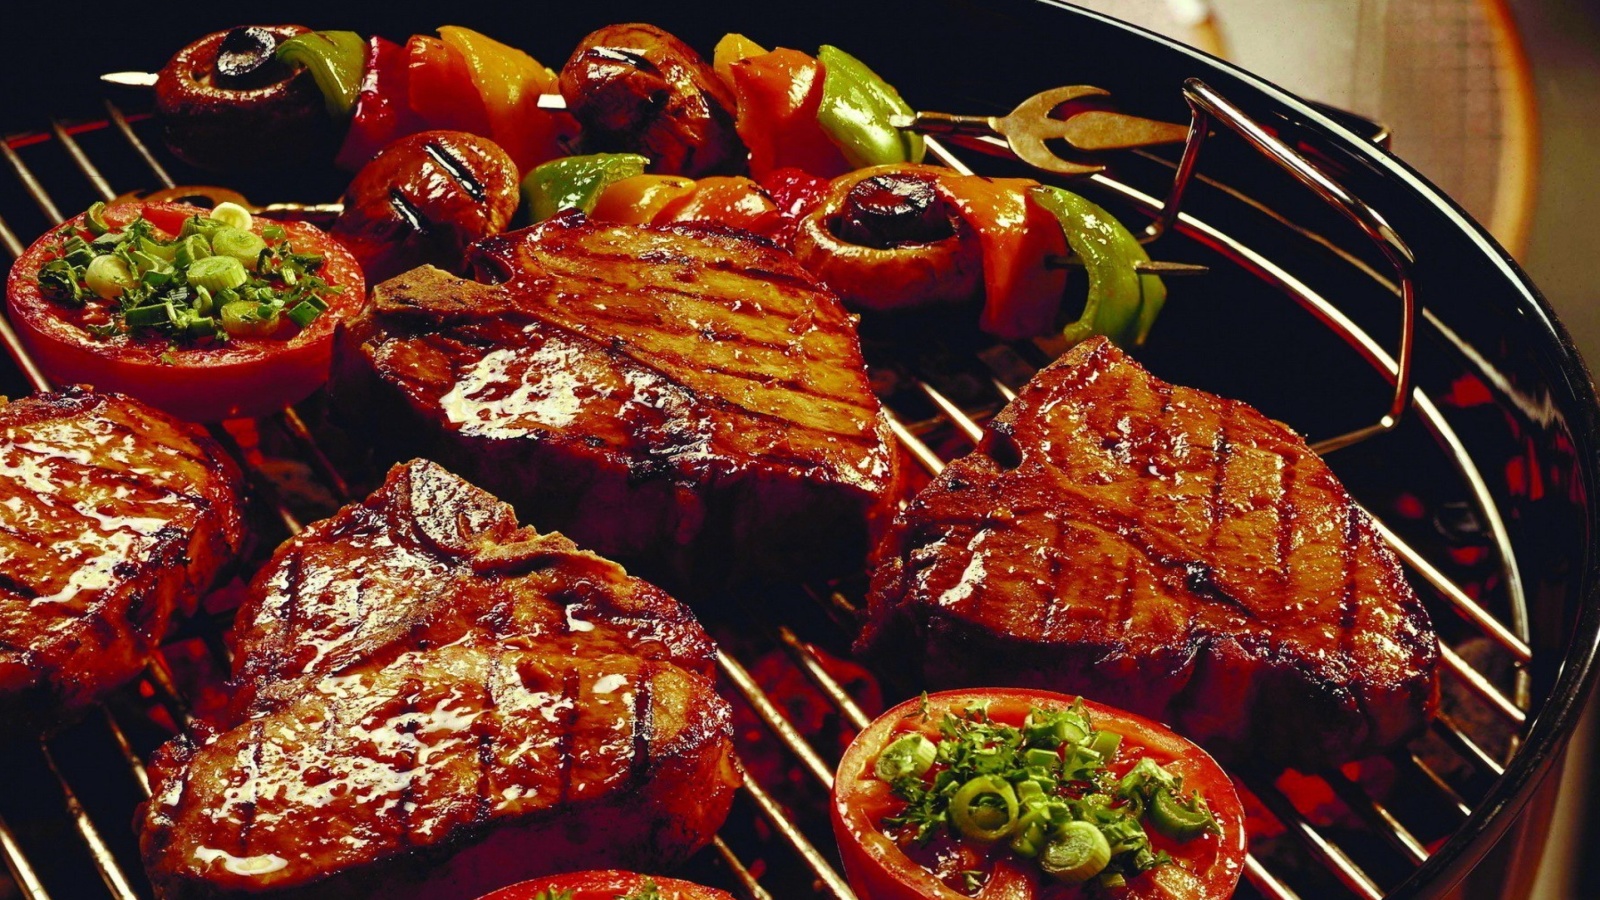 Barbecue and Grilling Meats wallpaper 1600x900